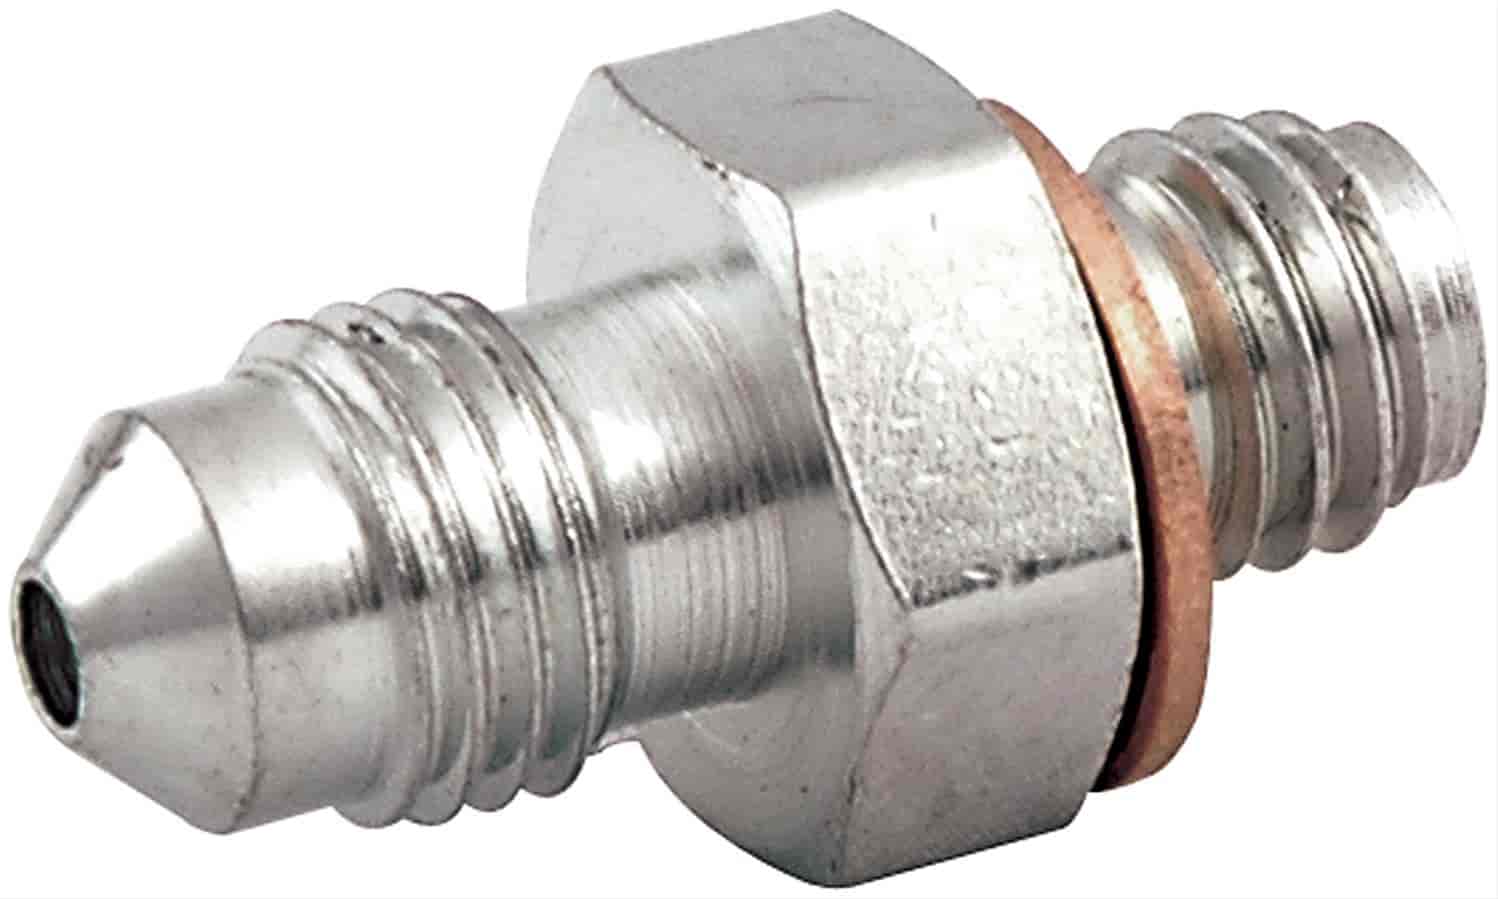 Adapter Fittings -4AN Male to 10mm x 1.5 Male